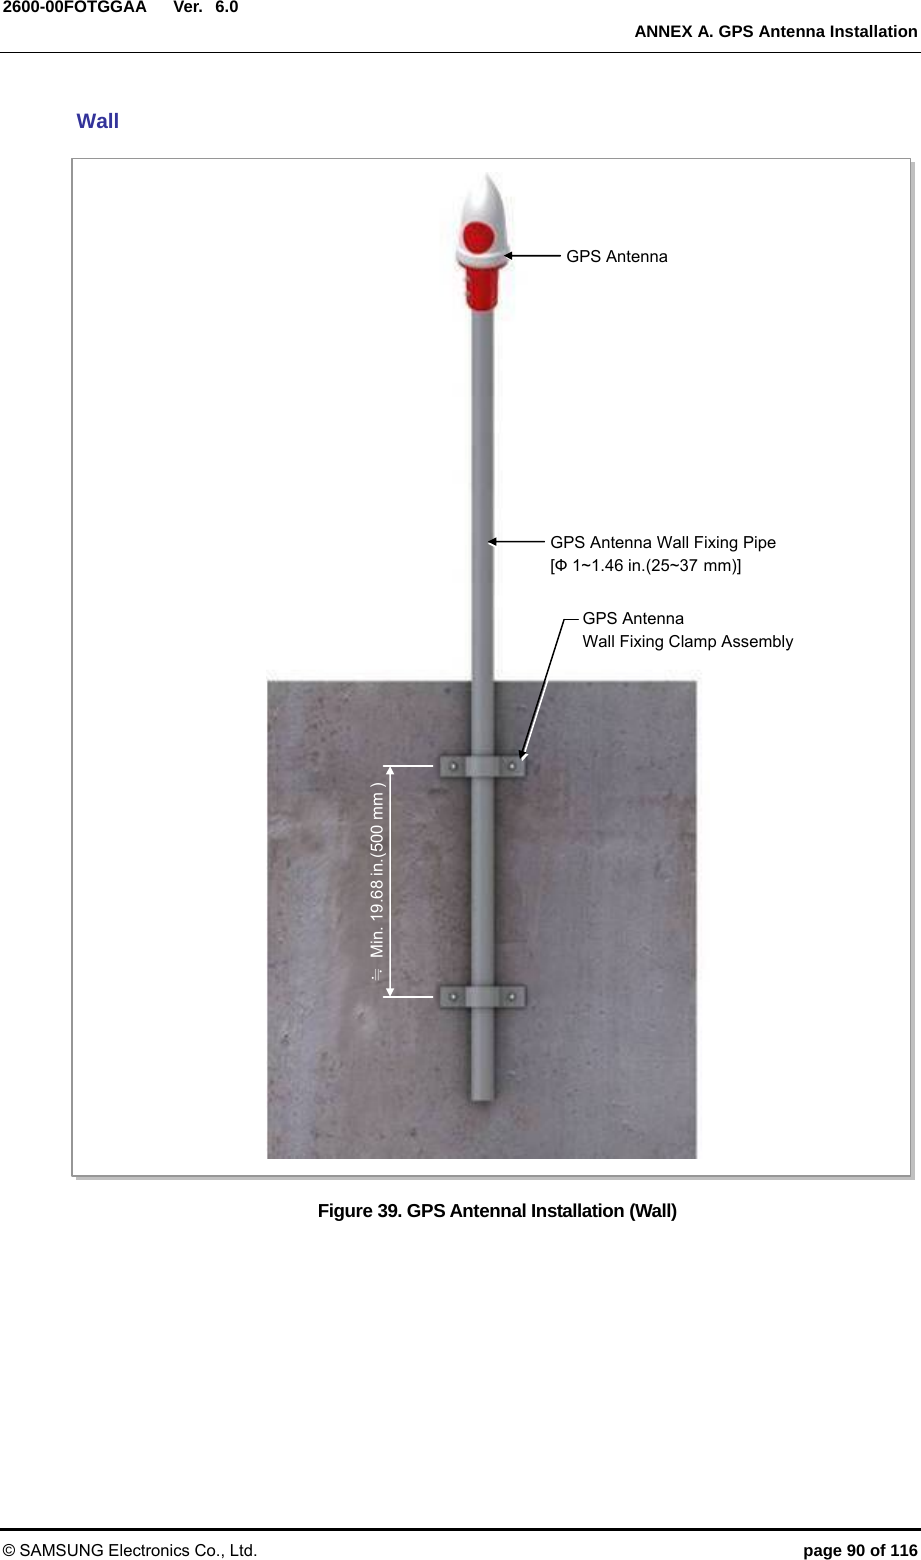  Ver.   ANNEX A. GPS Antenna Installation © SAMSUNG Electronics Co., Ltd.  page 90 of 116 2600-00FOTGGAA 6.0Wall Figure 39. GPS Antennal Installation (Wall) GPS Antenna Wall Fixing Pipe [Ф 1~1.46 in.(25~37 mm)] GPS AntennaGPS Antenna Wall Fixing Clamp Assembly ≒  Min. 19.68 in.(500 mm ) 